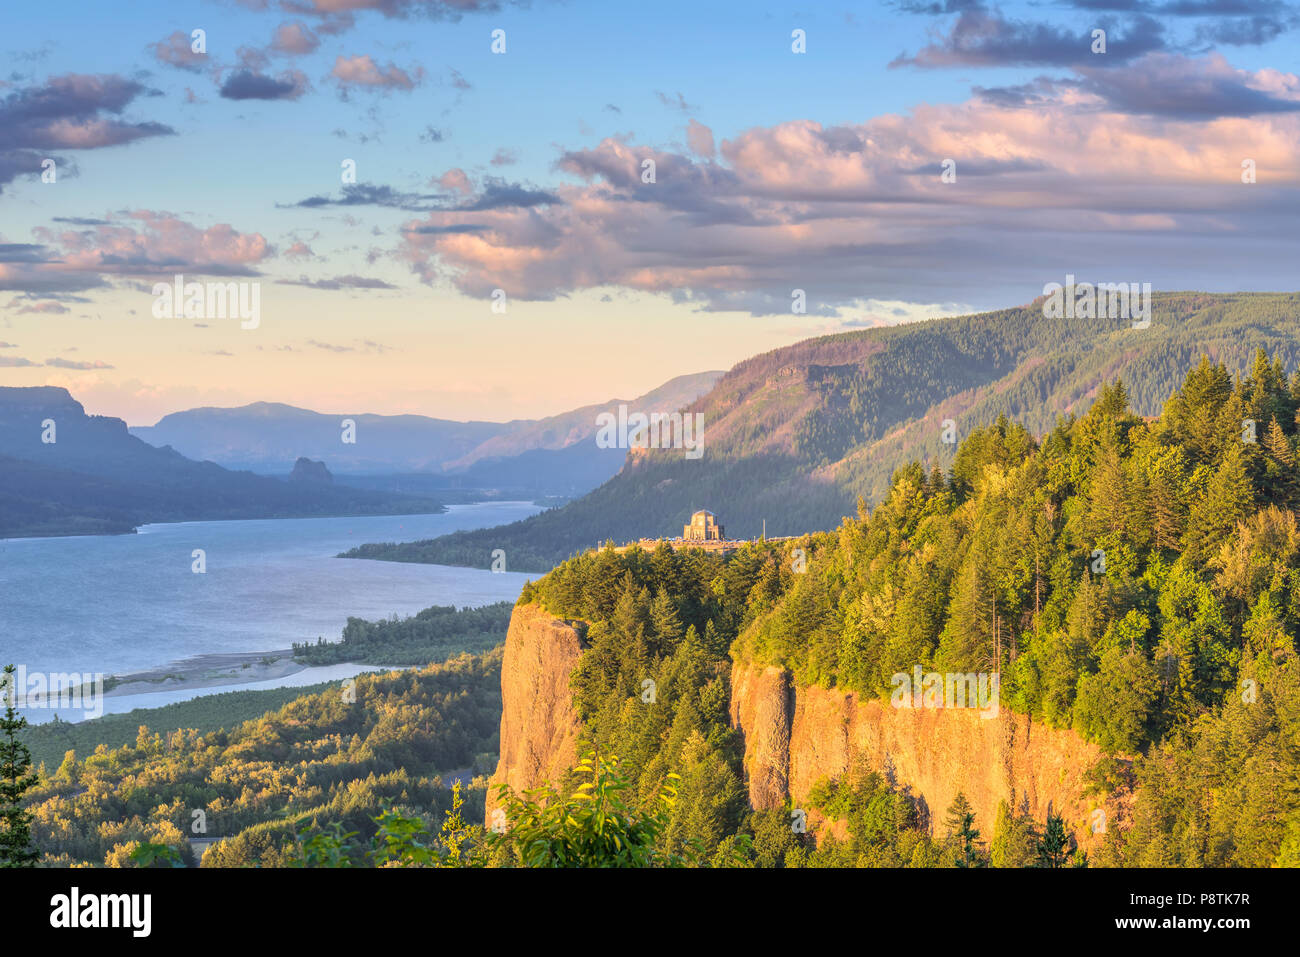 Sunset At Columbia River Gorge Oregon Stock Photo - Download Image